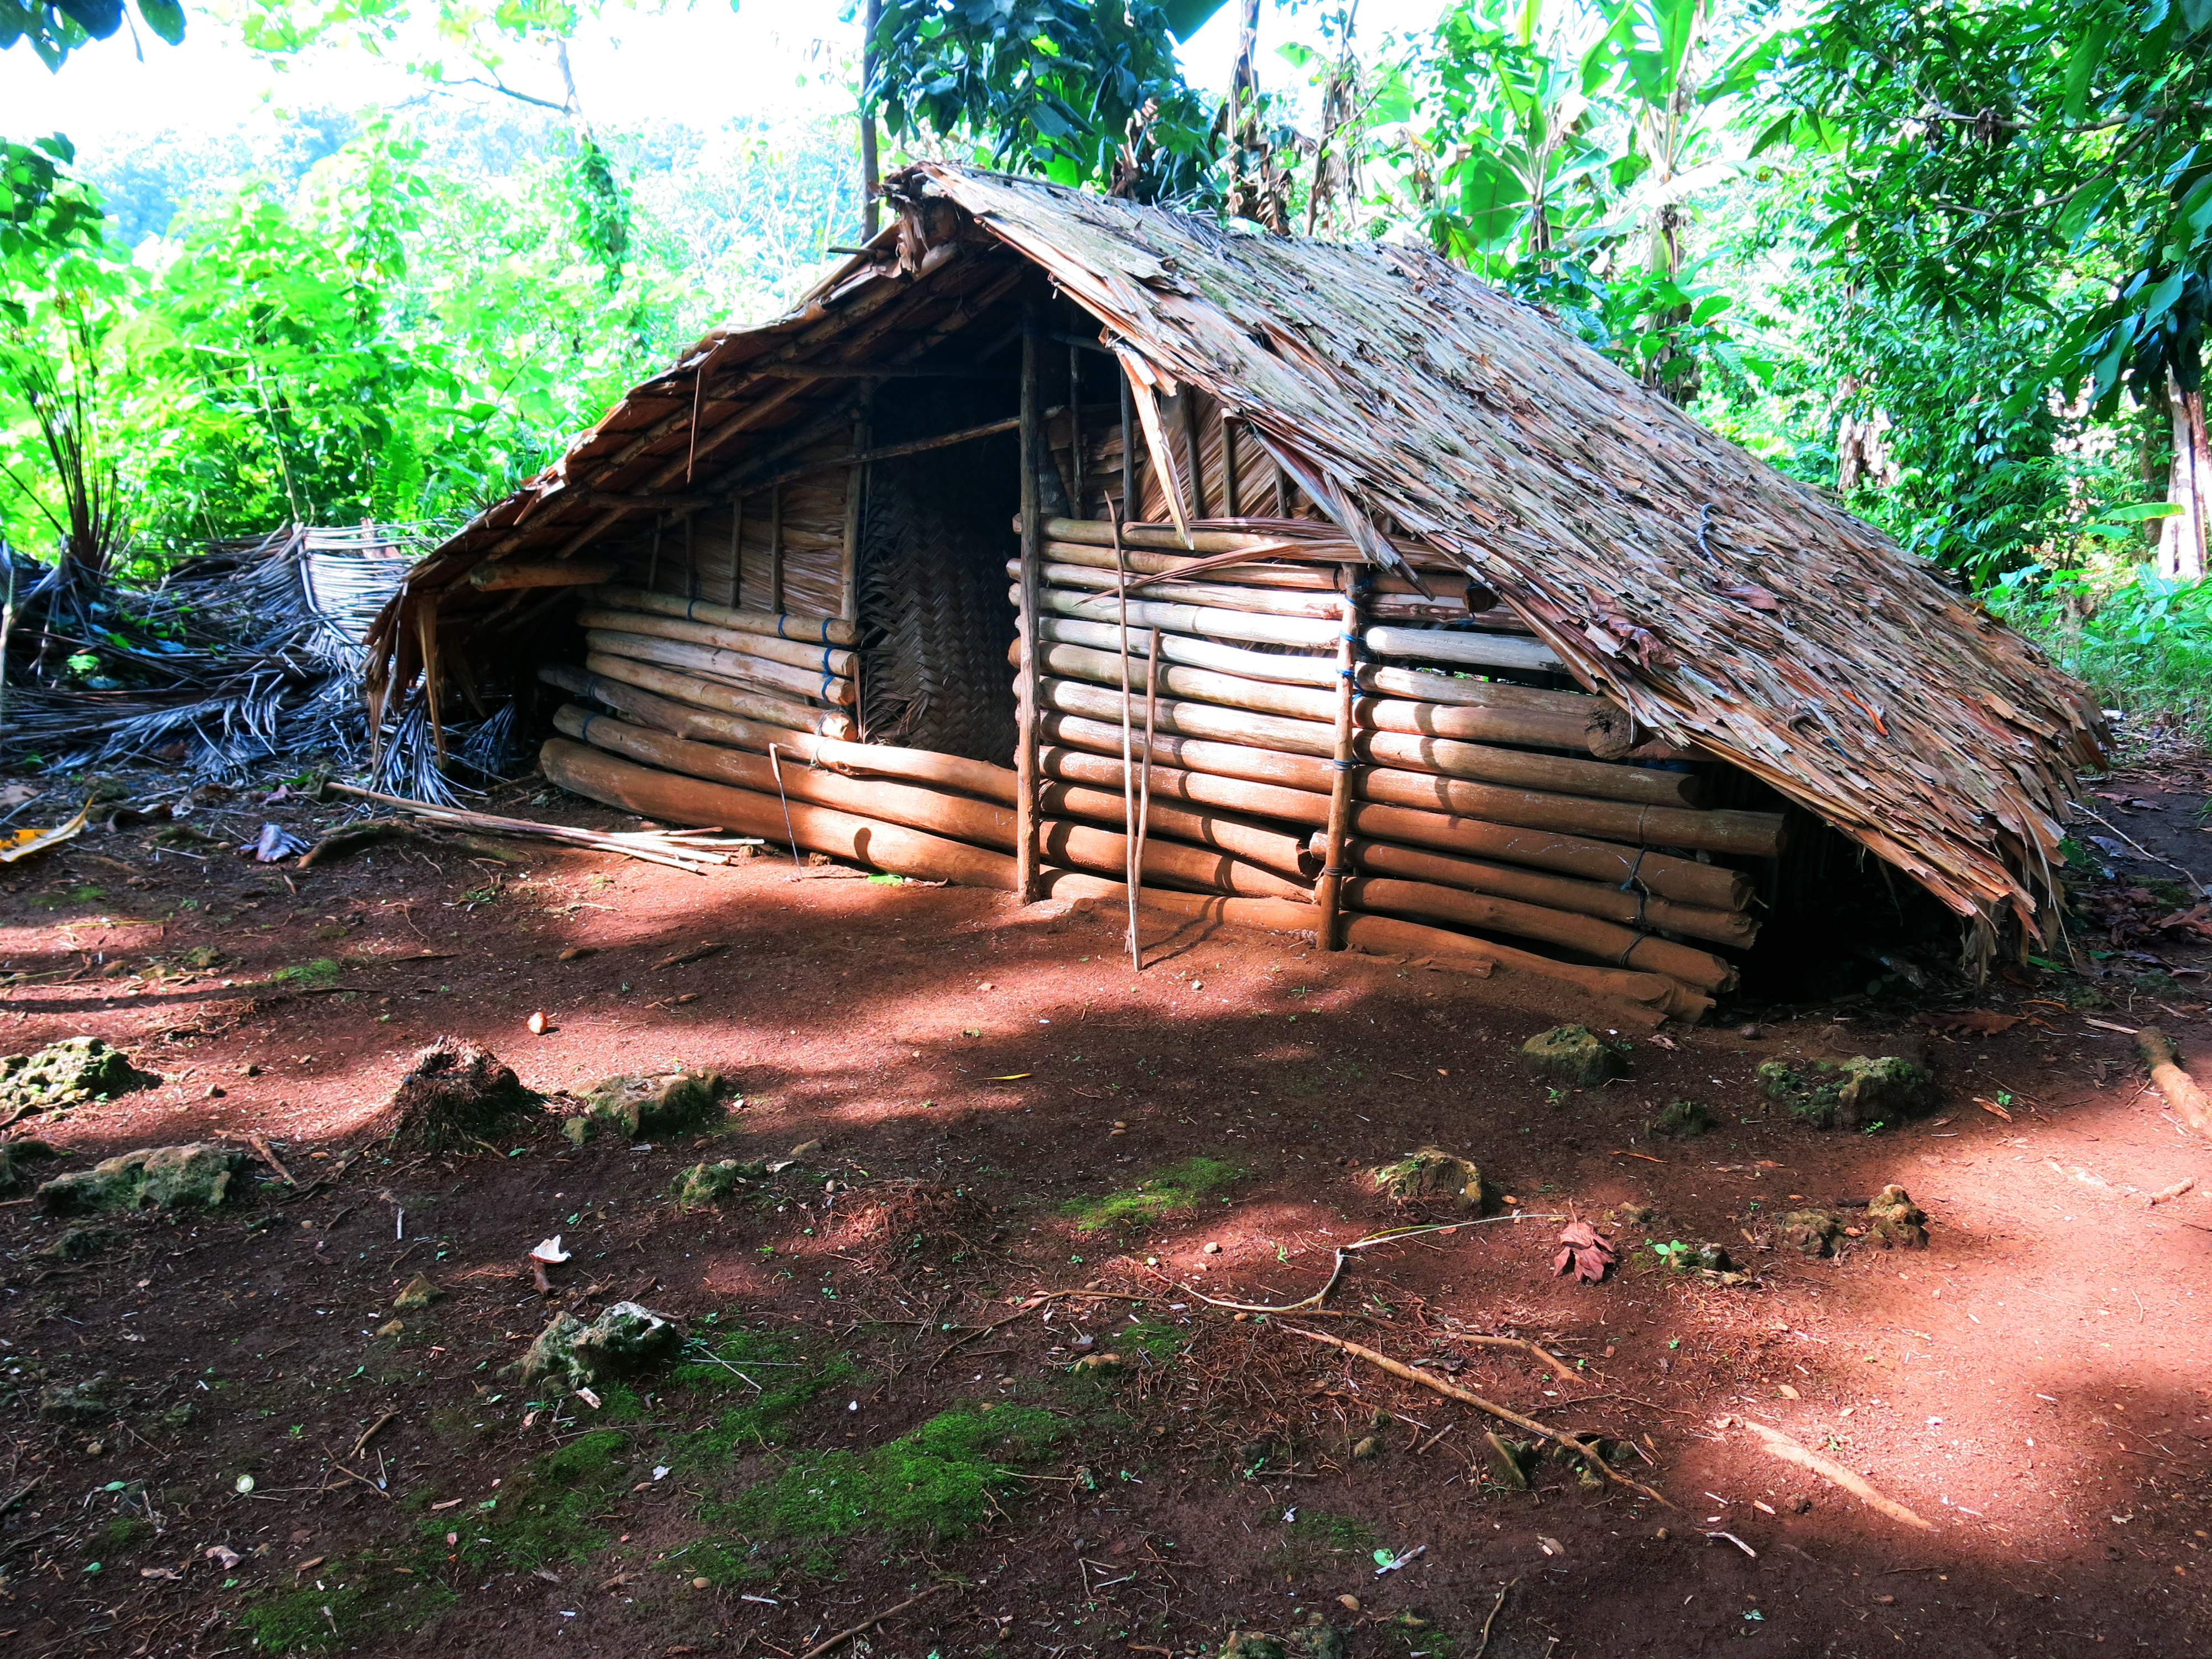 File:A traditional food hut for storing yam, taro and other food ...